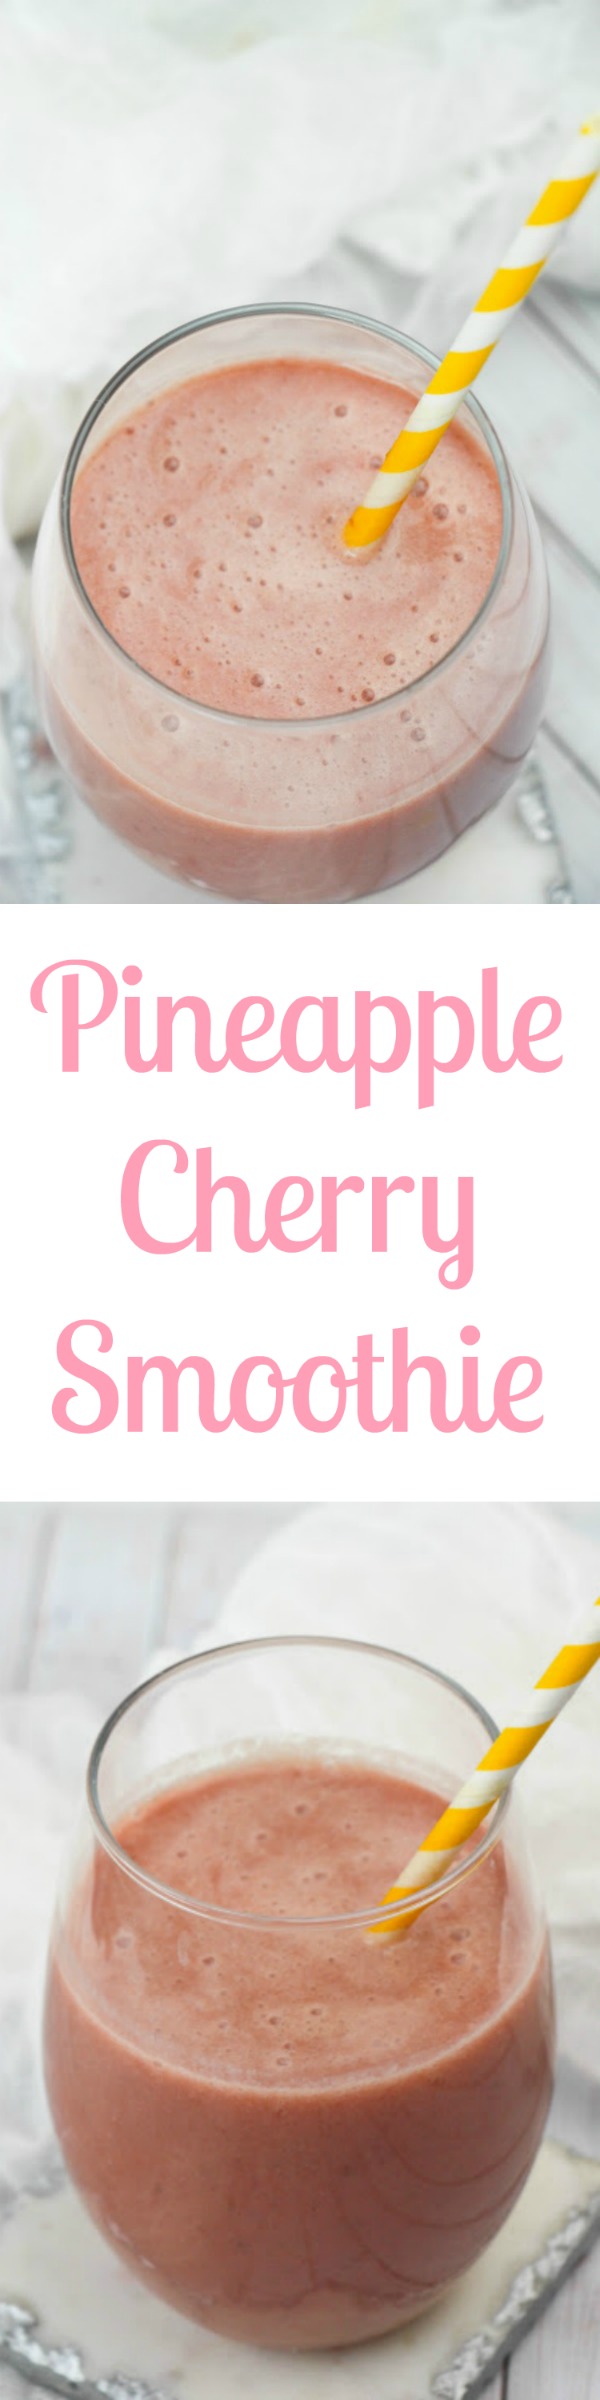 Pineapple Cherry Smoothies taste great and are a healthy snack too! #Easy #Recipes #MealPlan